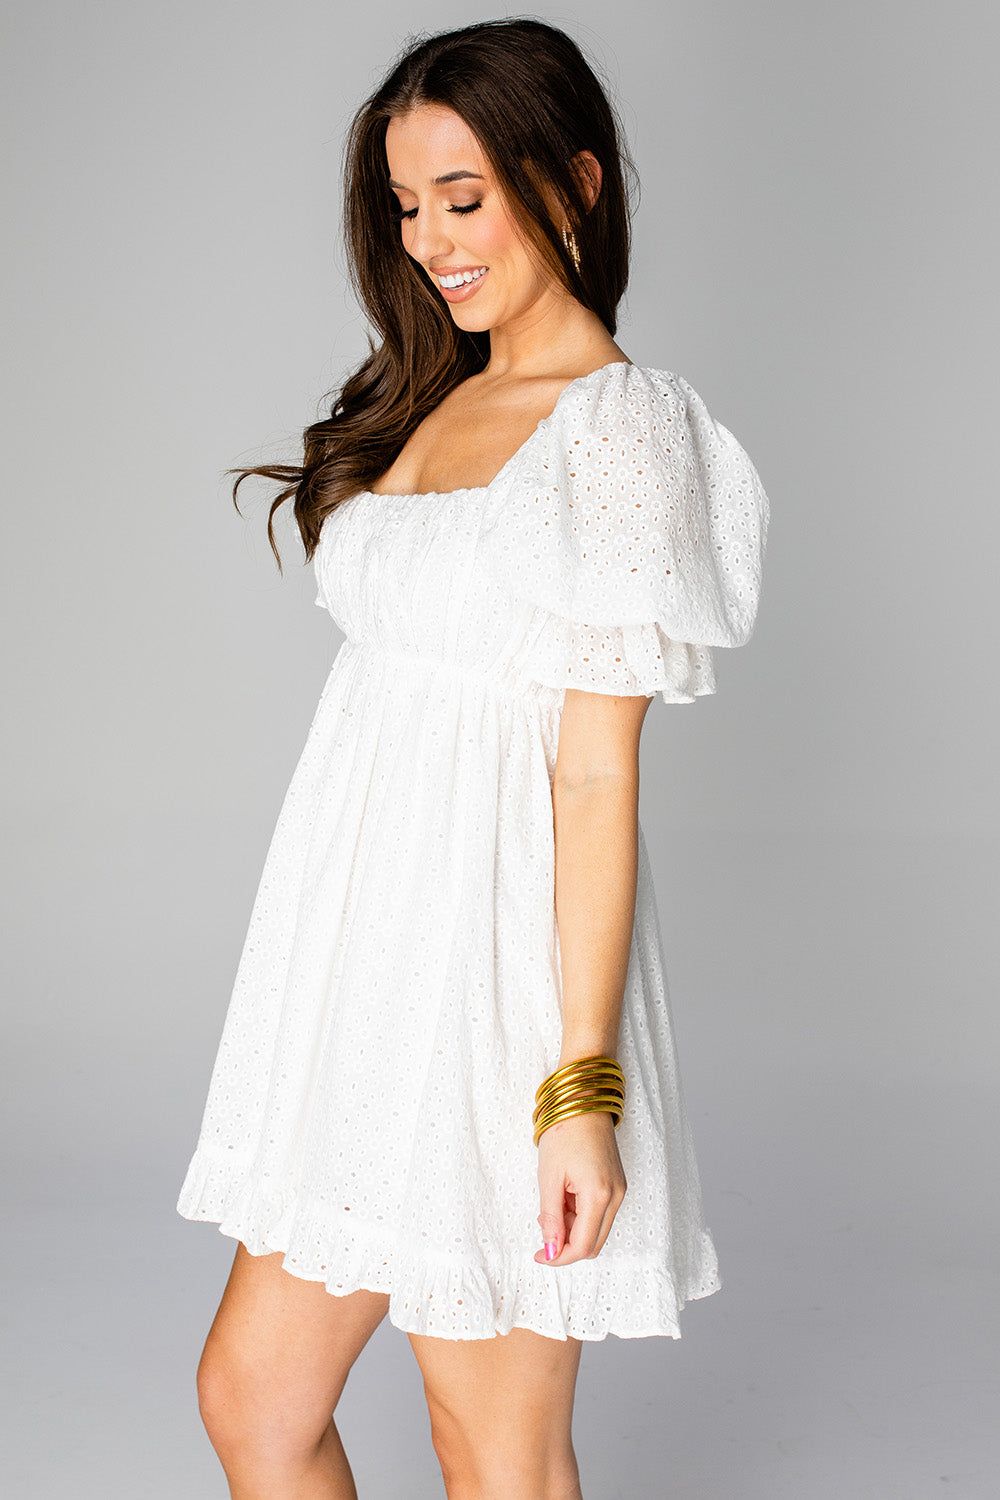 Outfit Ideas White Baby Doll
  Dress